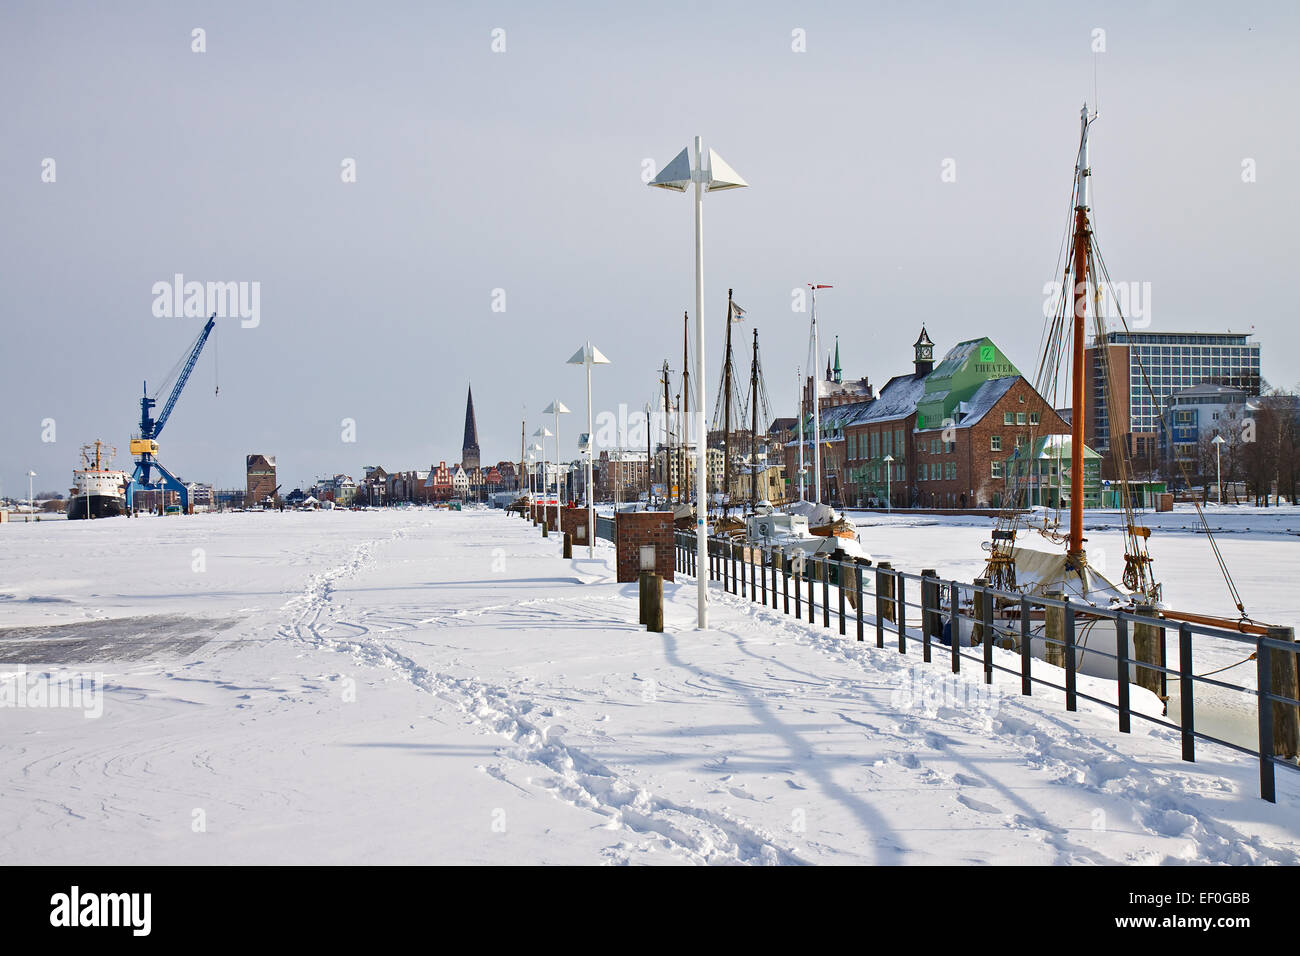 The city port of Rostock in the winter. Stock Photo